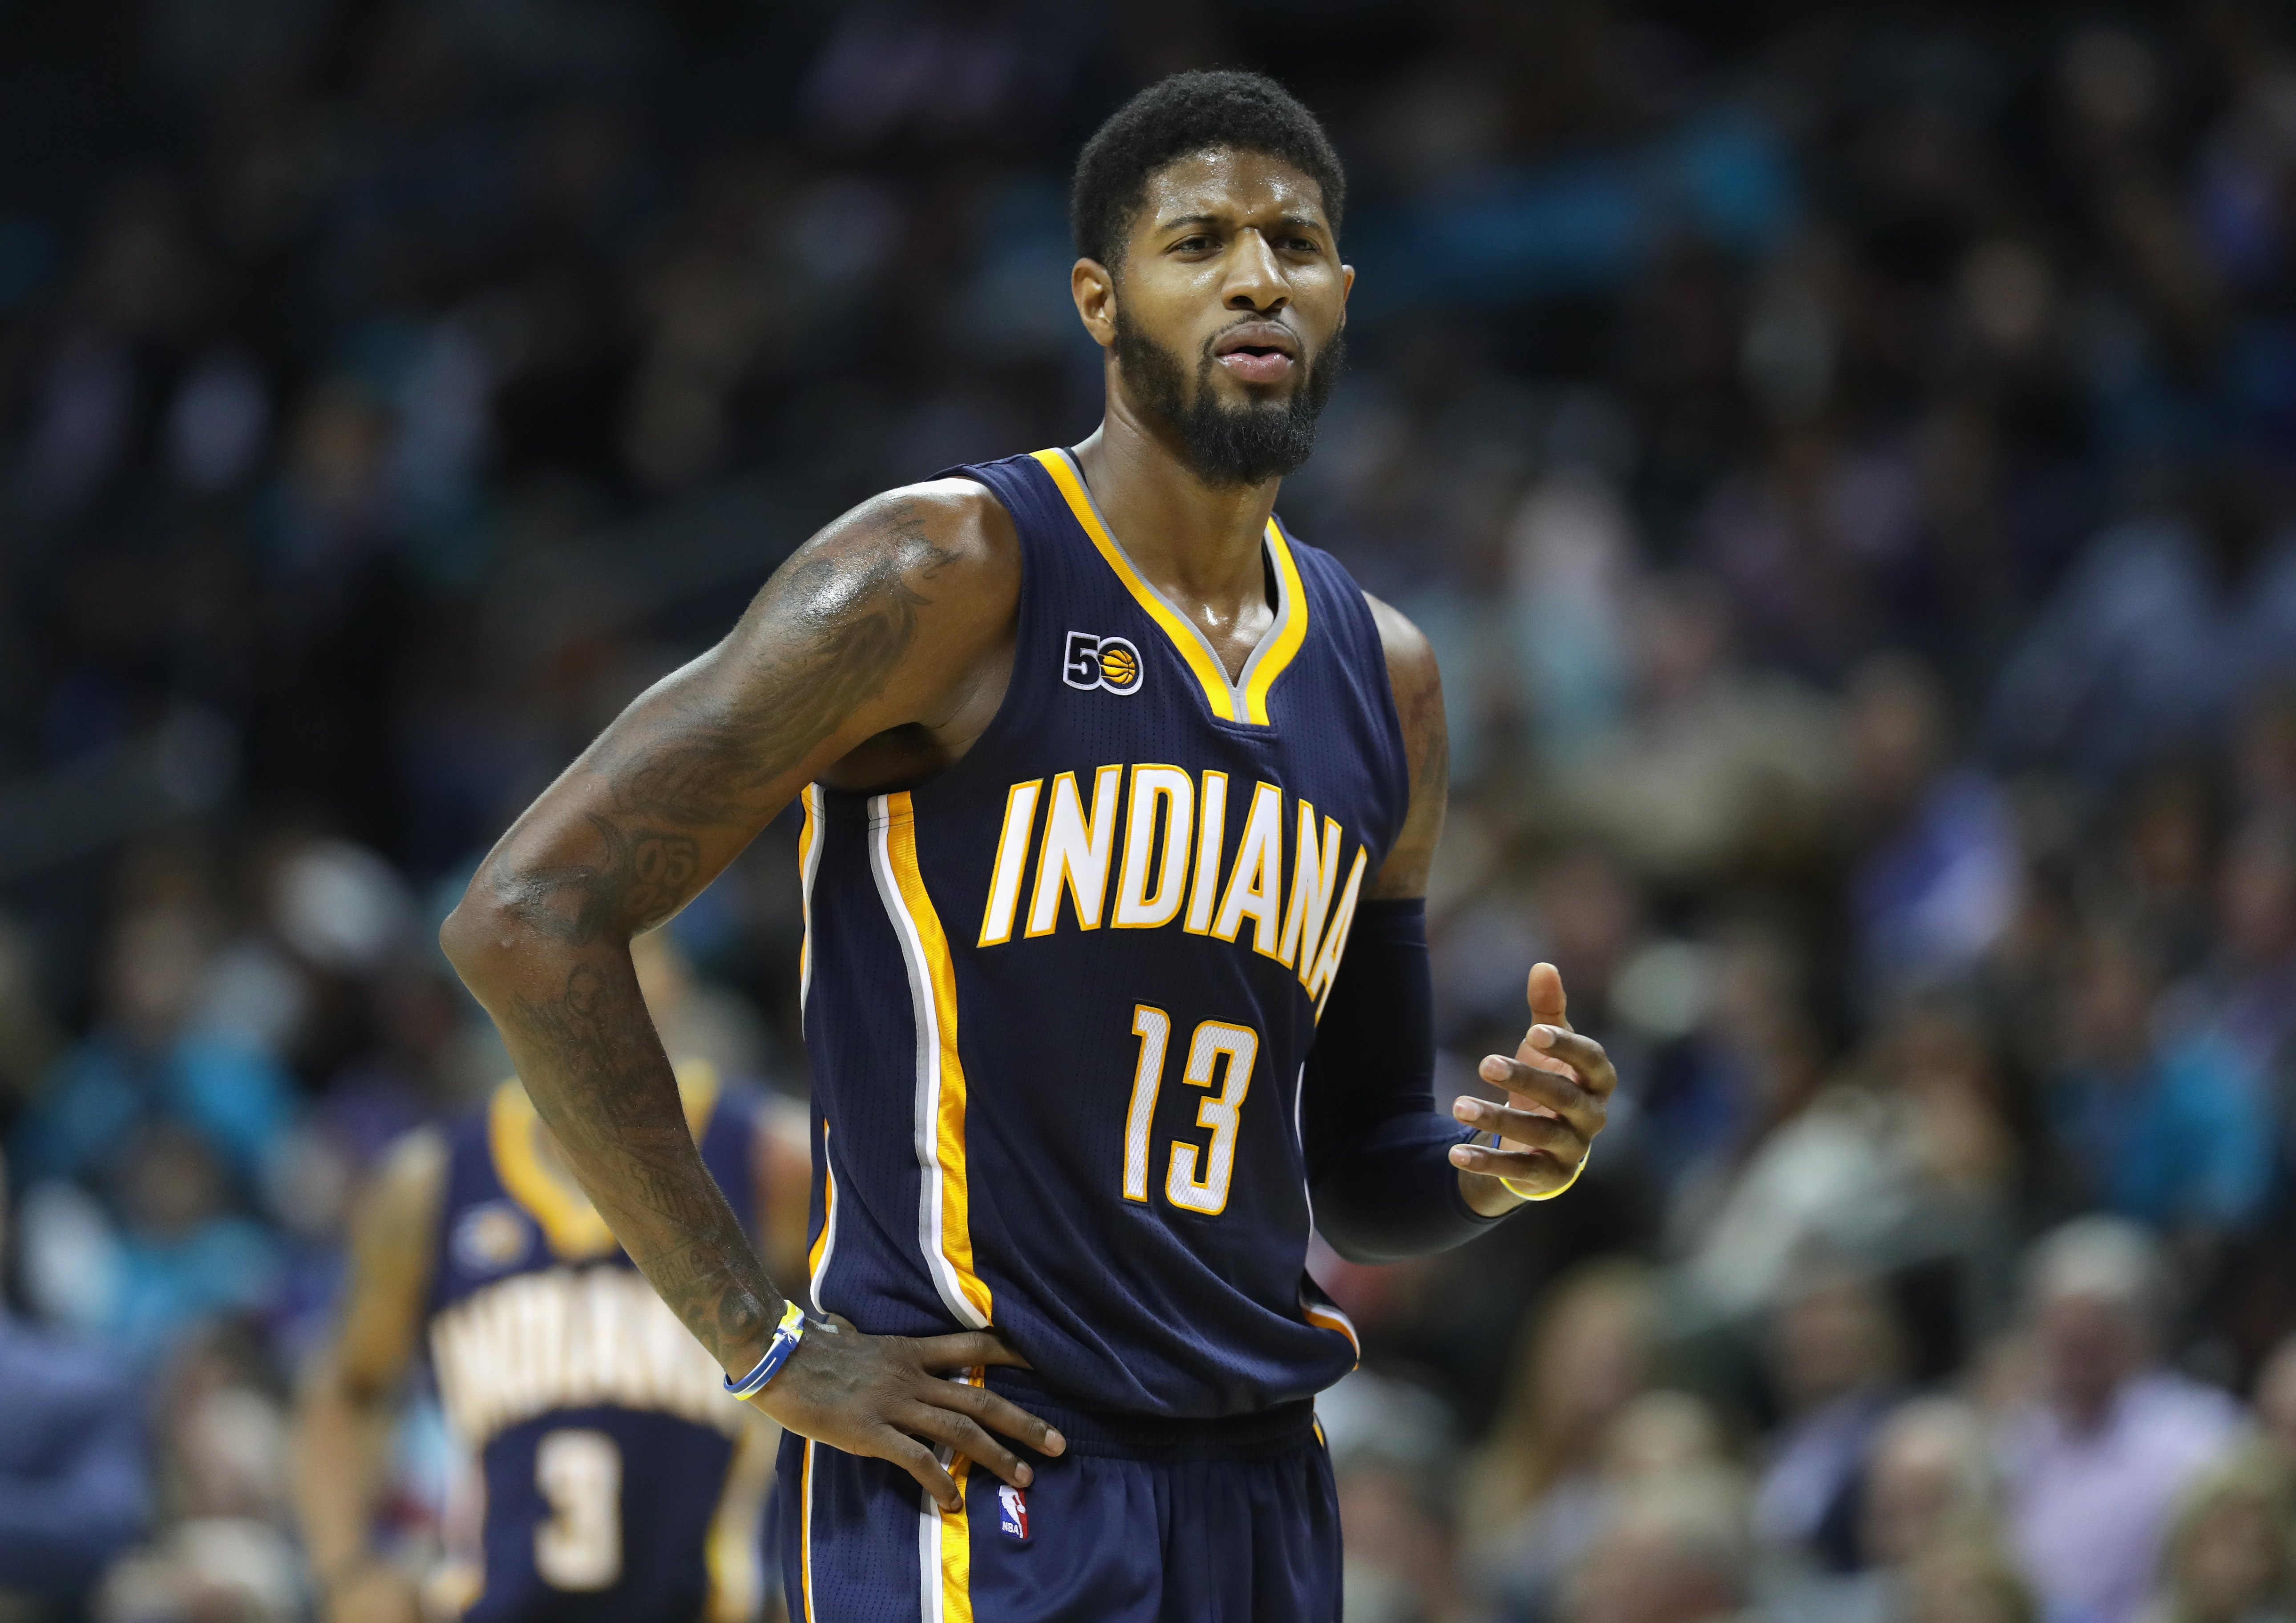 CHARLOTTE, NC - NOVEMBER 07: Paul George #13 of the Indiana Pacers reacts to a call during their game against the Charlotte Hornets at Spectrum Center on November 7, 2016 in Charlotte, North Carolina. NOTE TO USER: User expressly acknowledges and agrees that, by downloading and or using this photograph, User is consenting to the terms and conditions of the Getty Images License Agreement.   Streeter Lecka/Getty Images/AFP